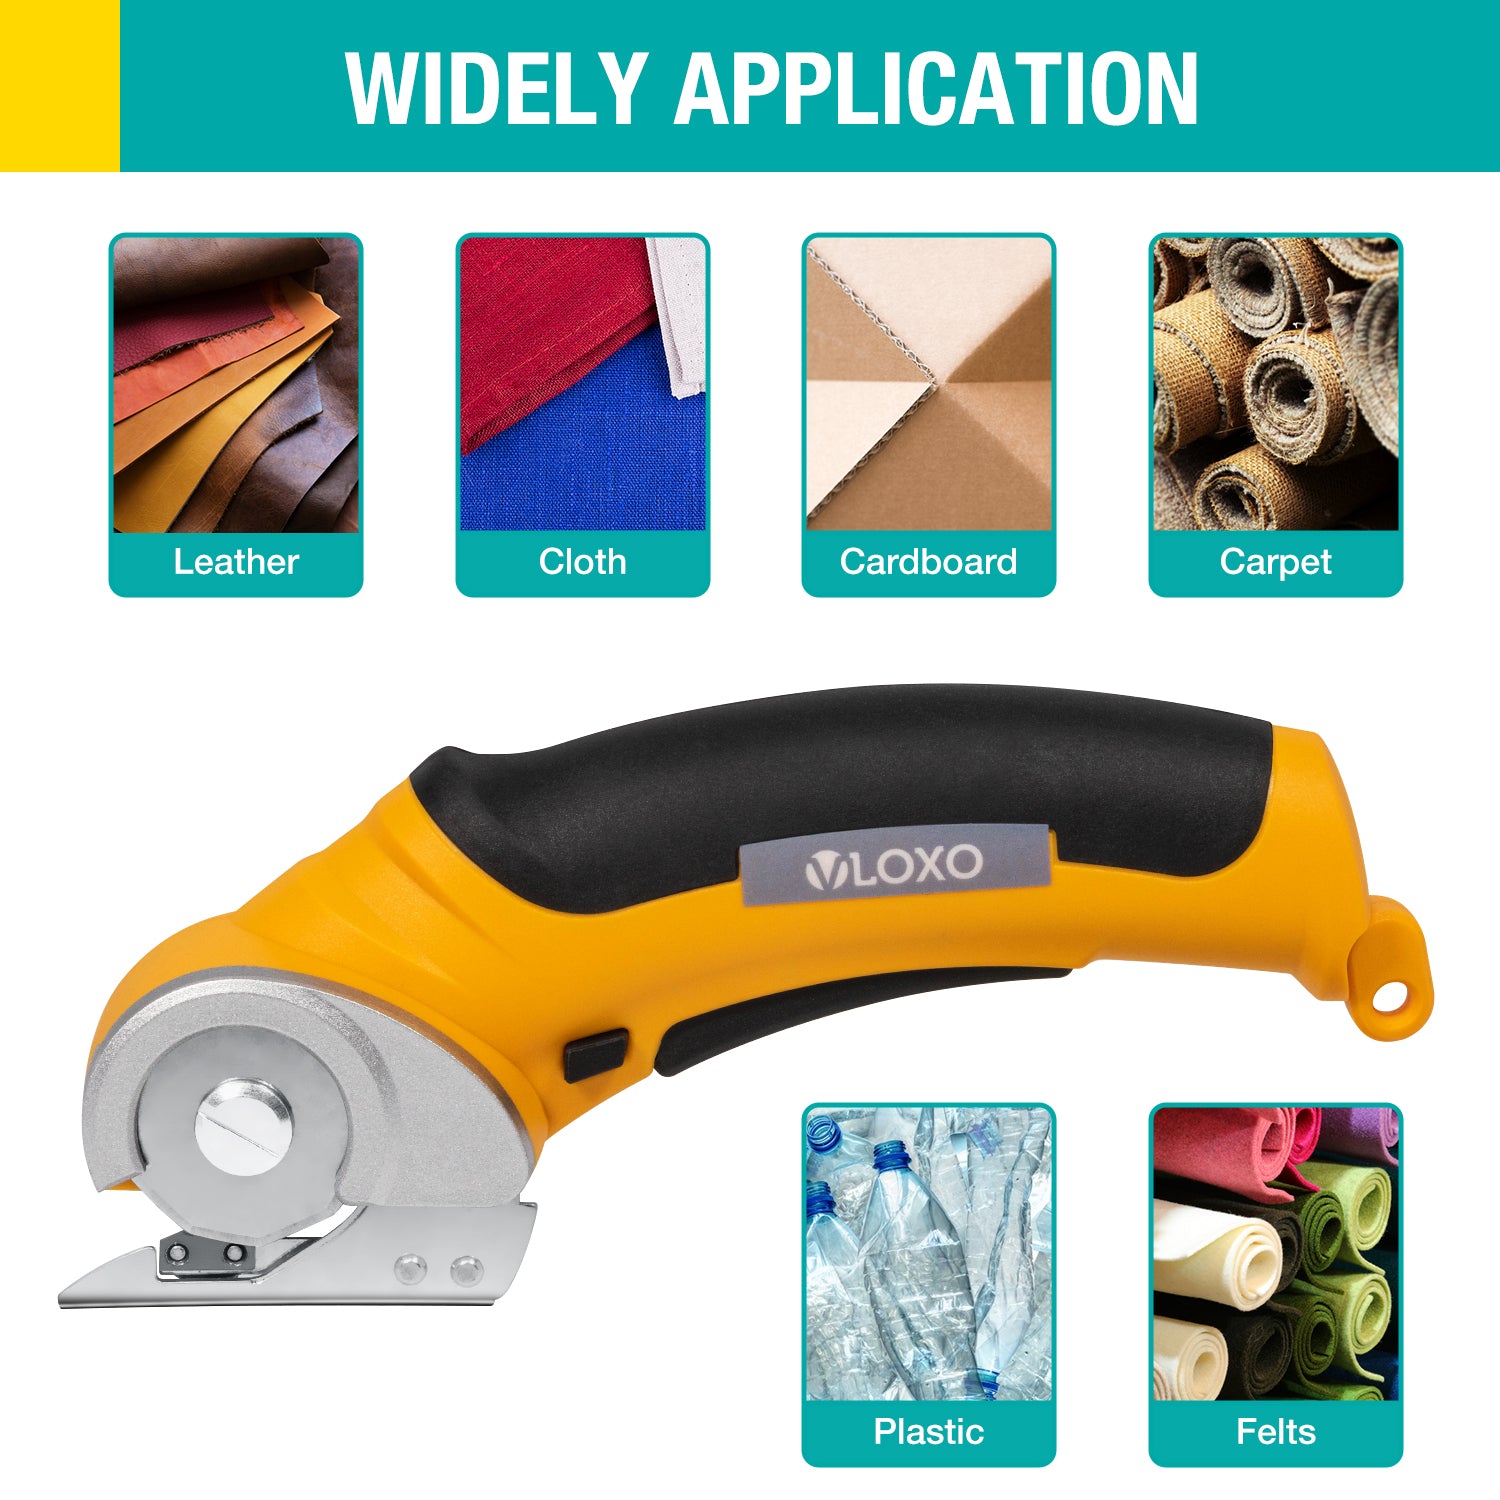 Electric Scissors for Cutting Fabric Wireless Power Scissors Cutting Tool Cutting for Cutting Fabric,Leather,Carpet and Cardboard Fabric Cutter, Size